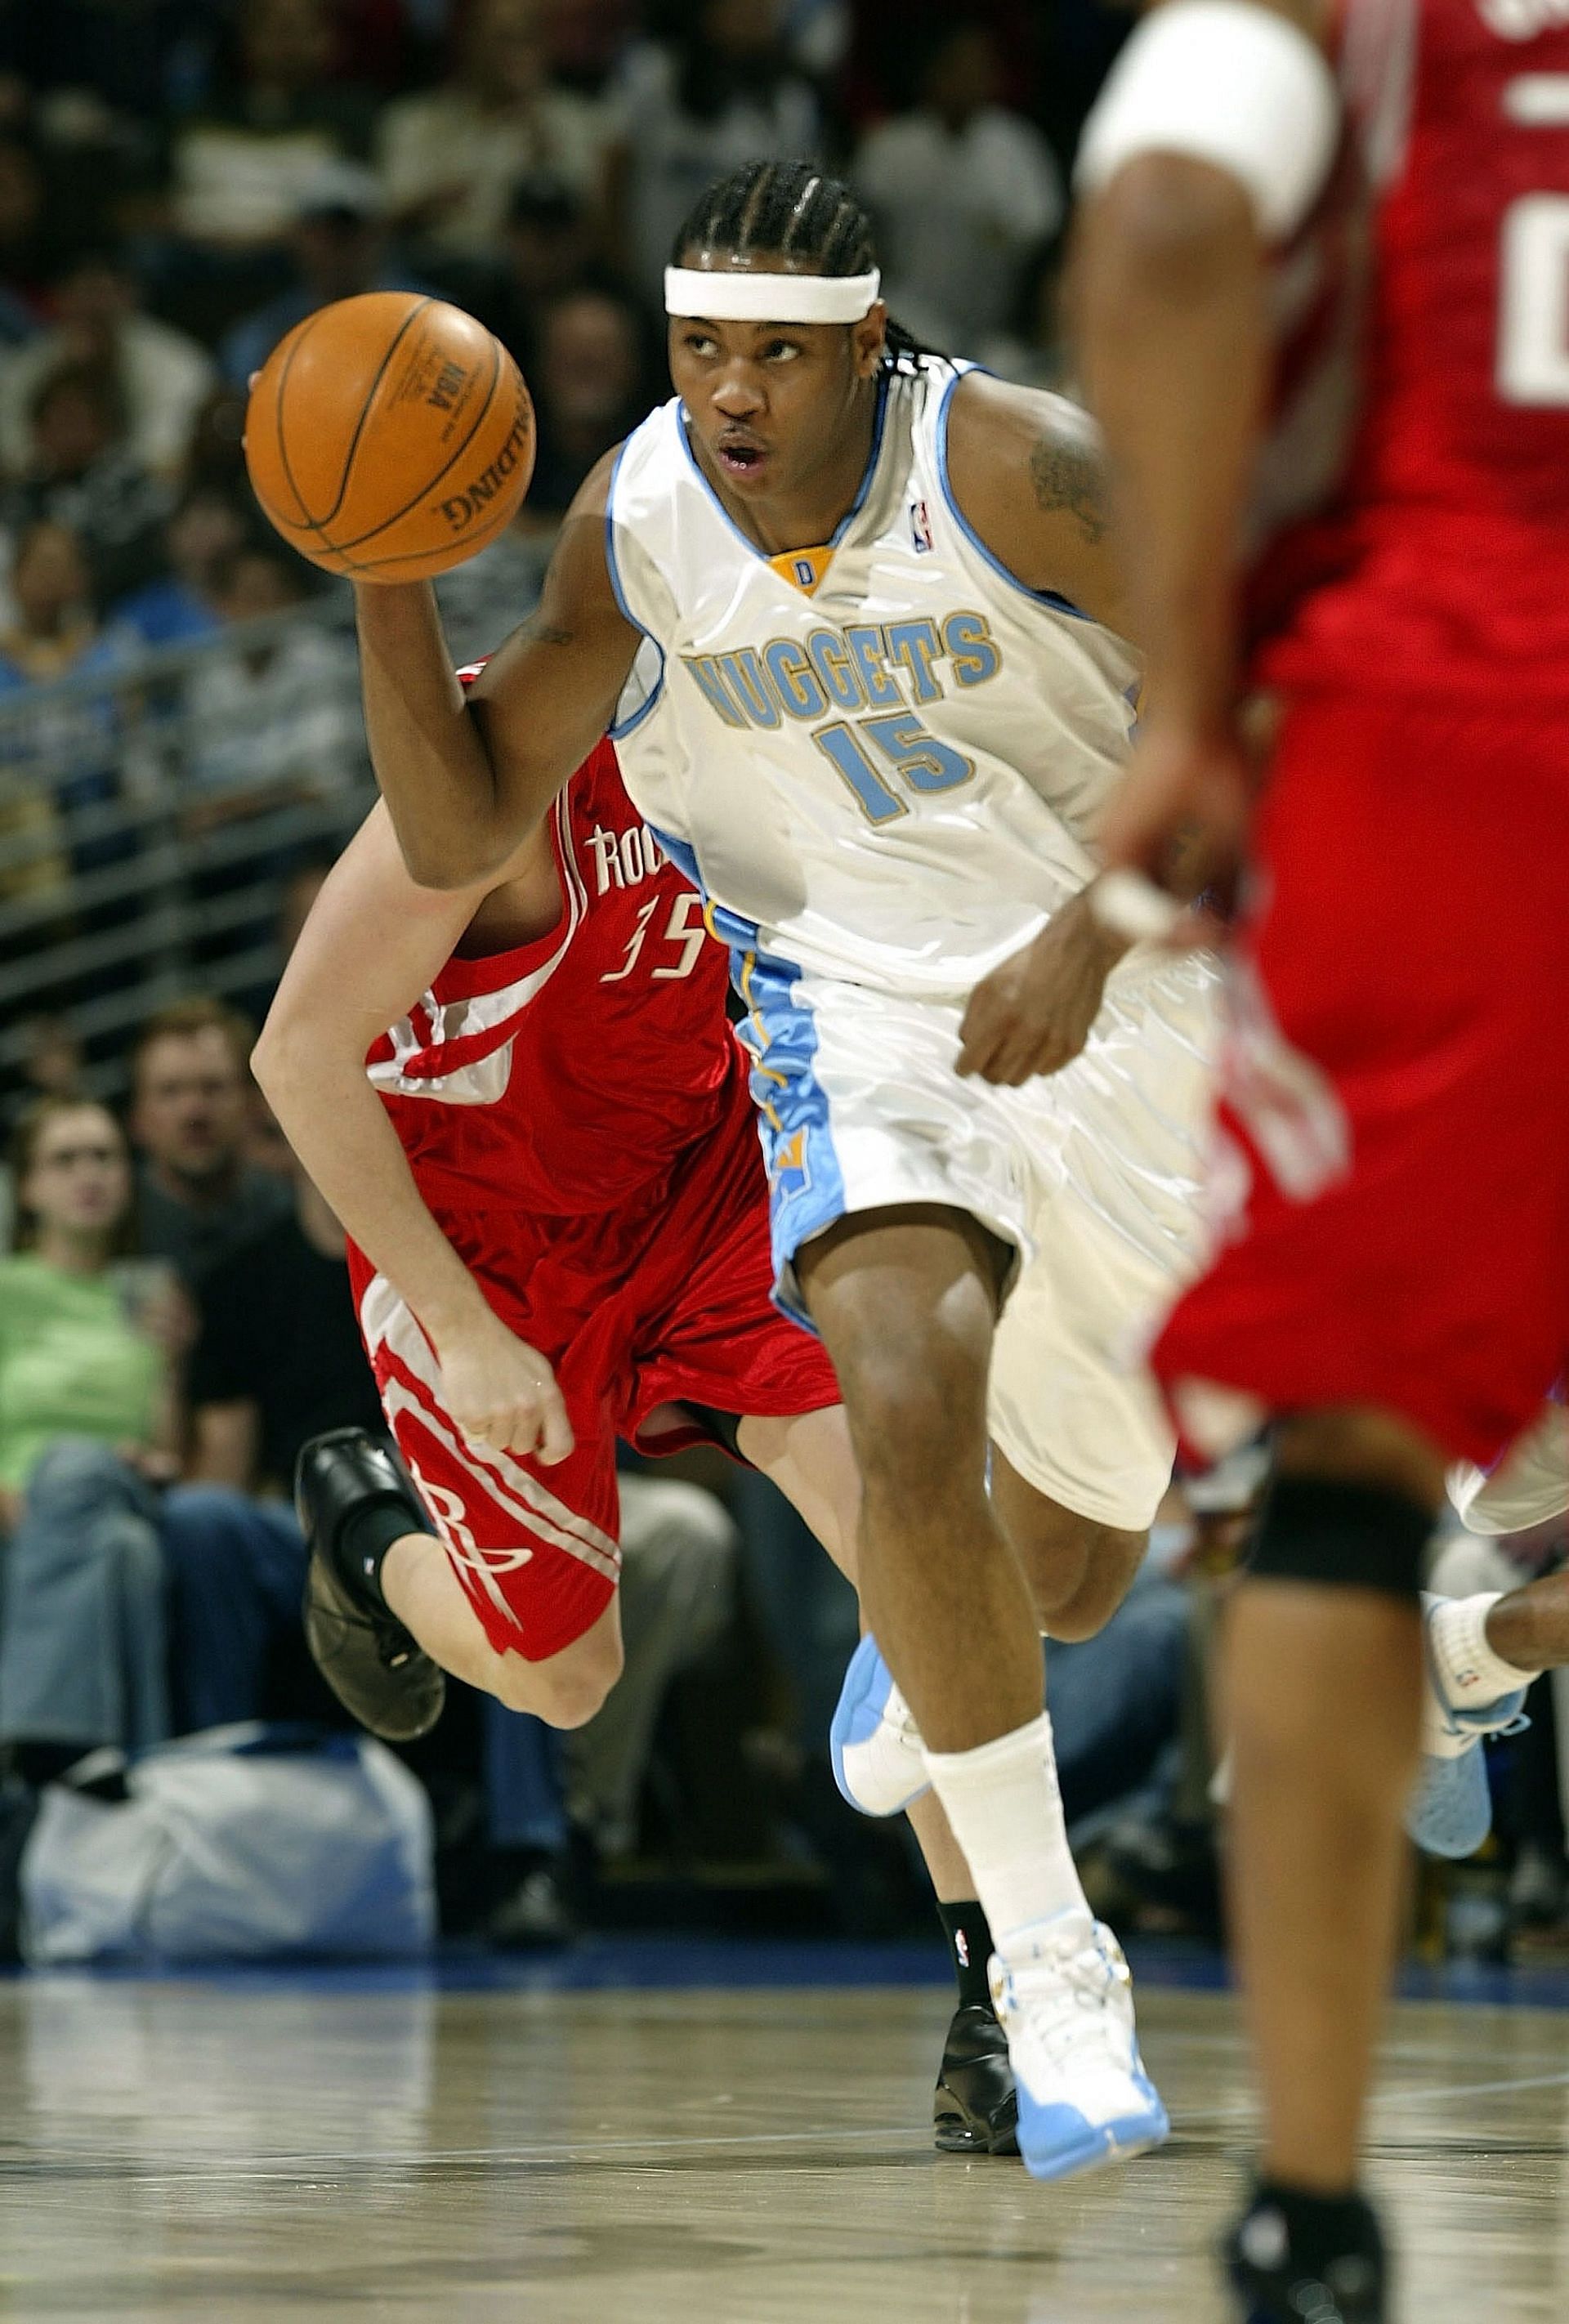 Carmelo Anthony made his NBA debut today in 2003